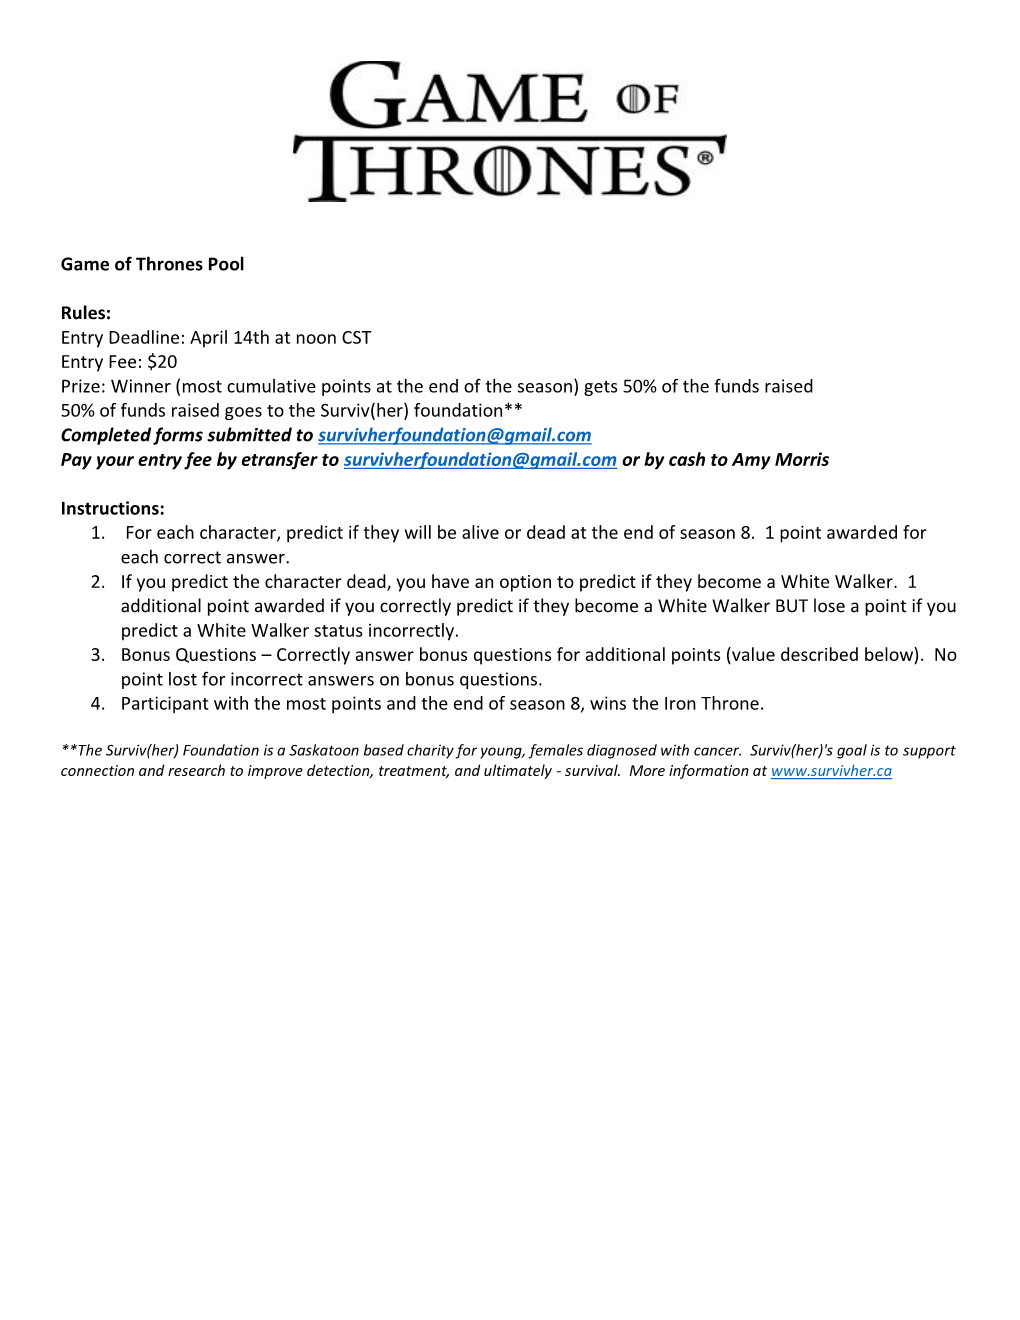 Game of Thrones Pool Rules: Entry Deadline: April